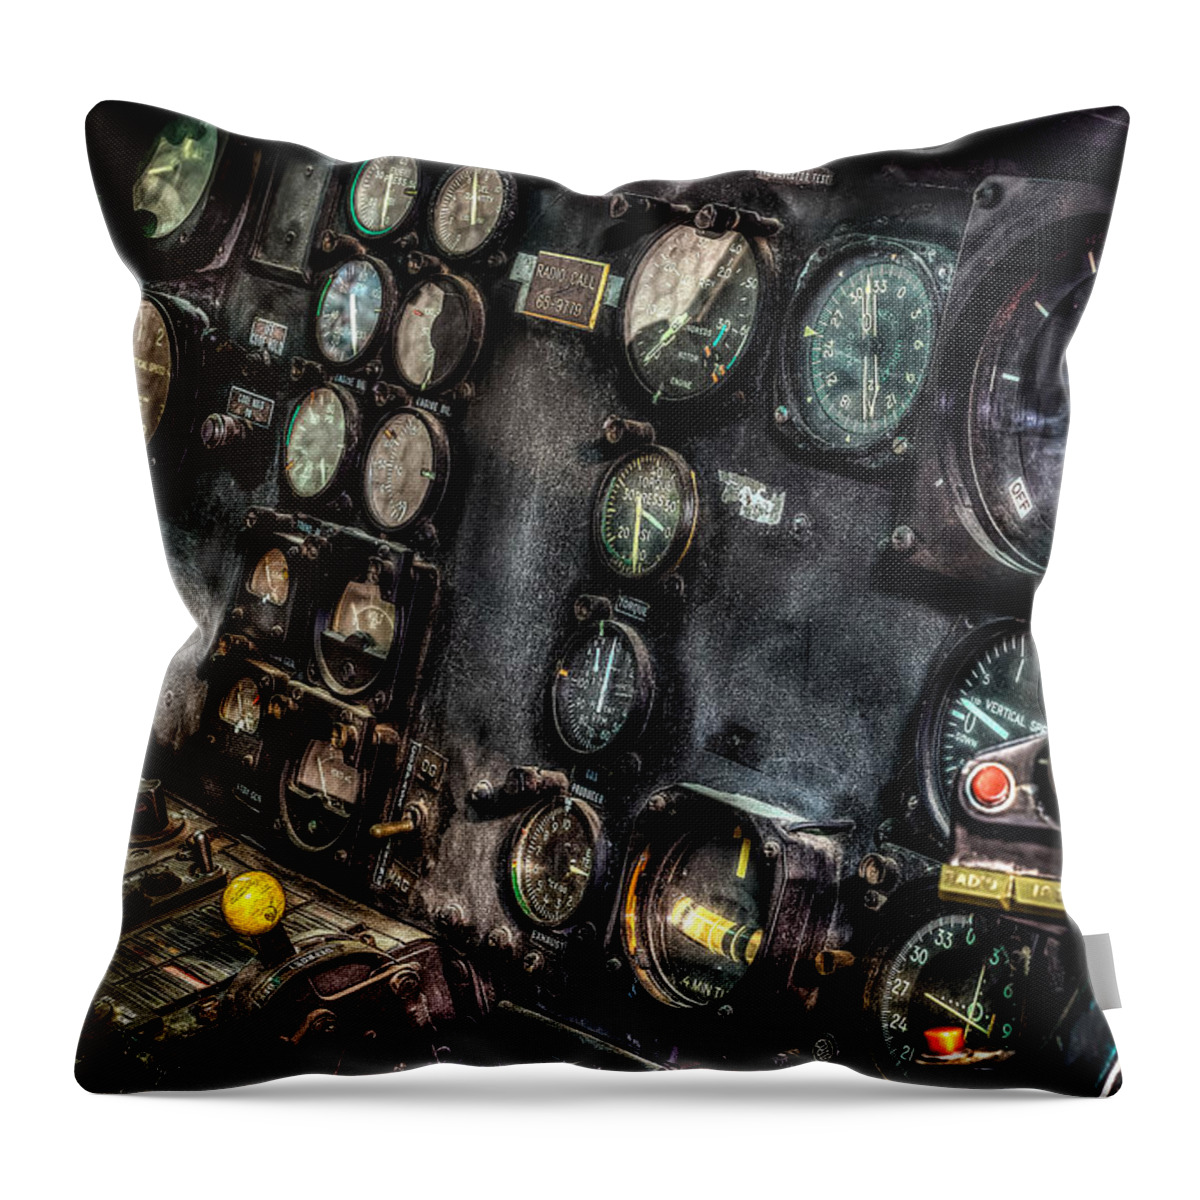 Huey Instrument Panel Throw Pillow featuring the photograph Huey Instrument Panel 2 by David Morefield